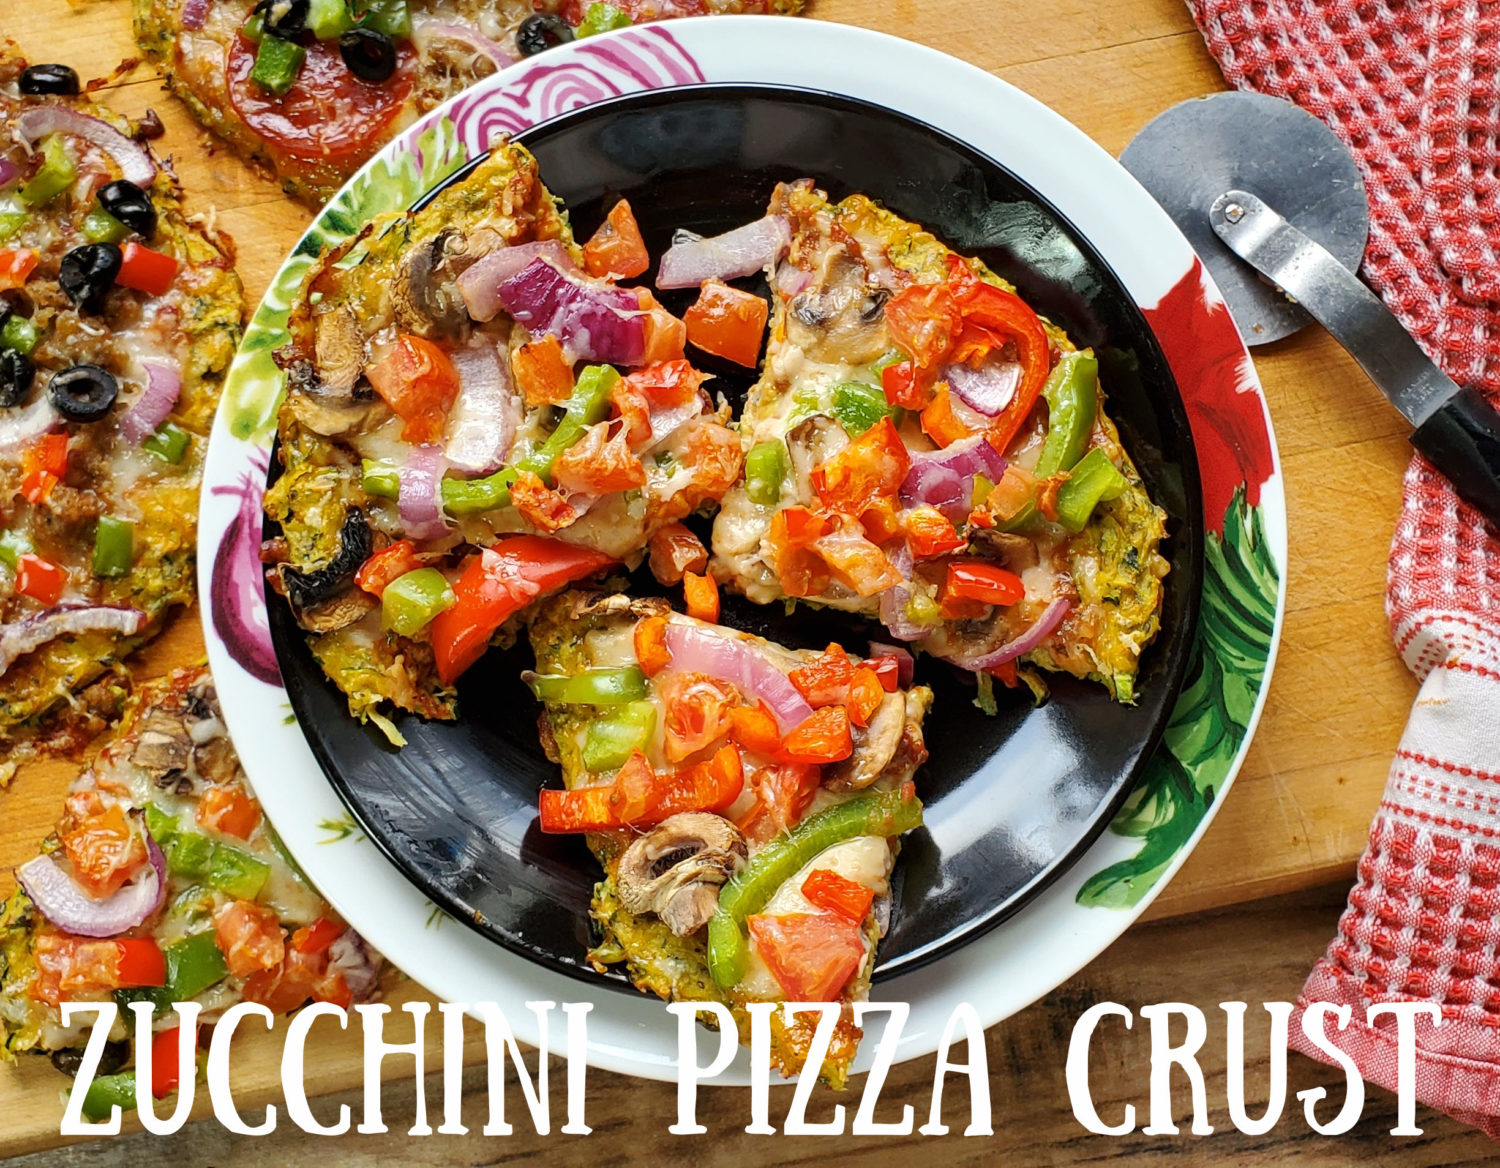 Zucchini Pizza Crust: Super tasty yet low carb, vegetarian, easy to make dairy free and gluten free; a pizza crust for the entire world.